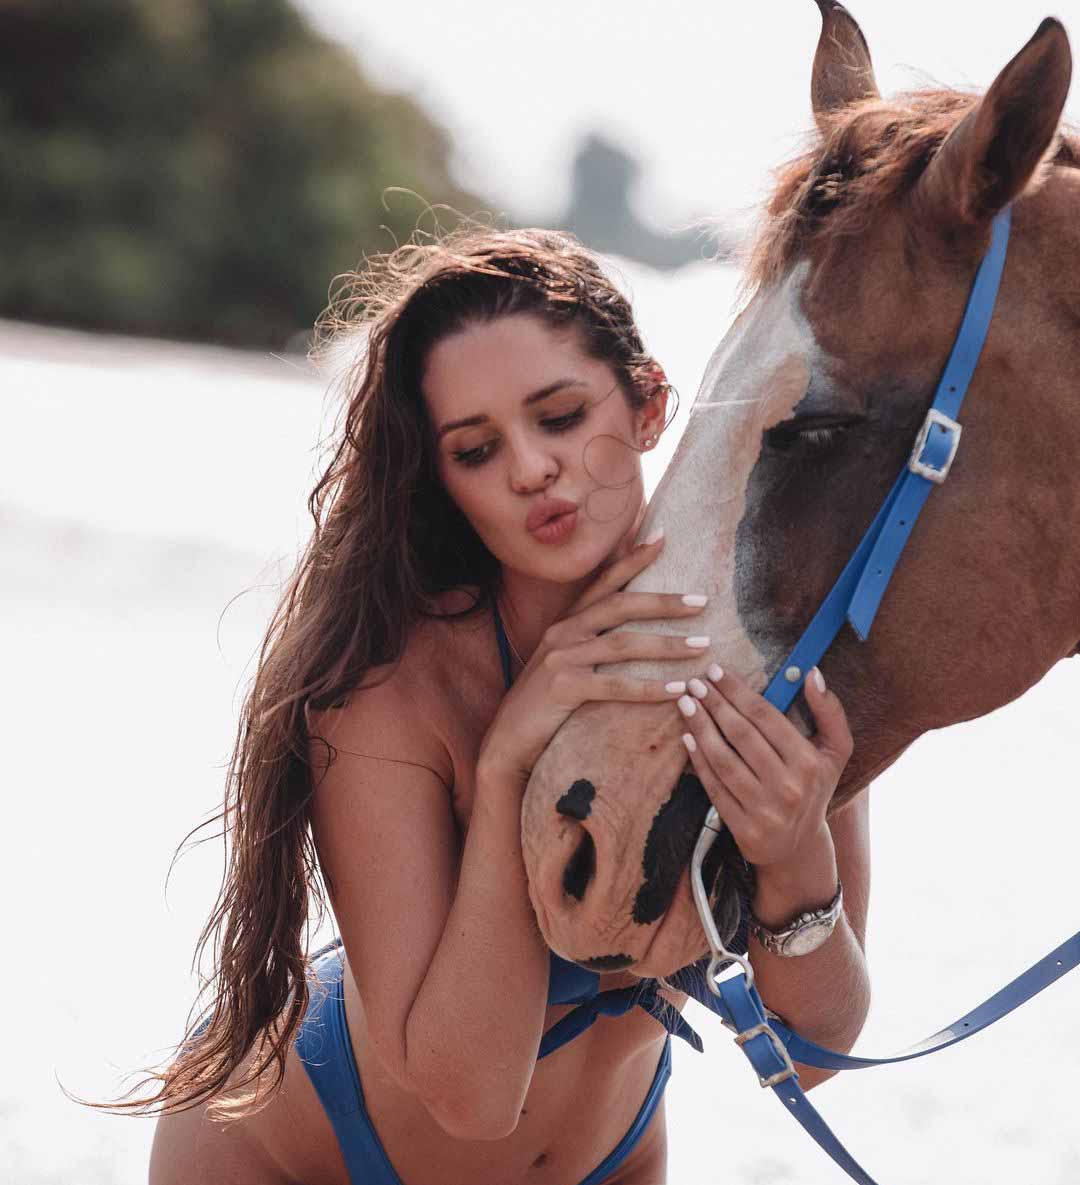 Erin-Williams in a mini crop top with panty while holding her horse face